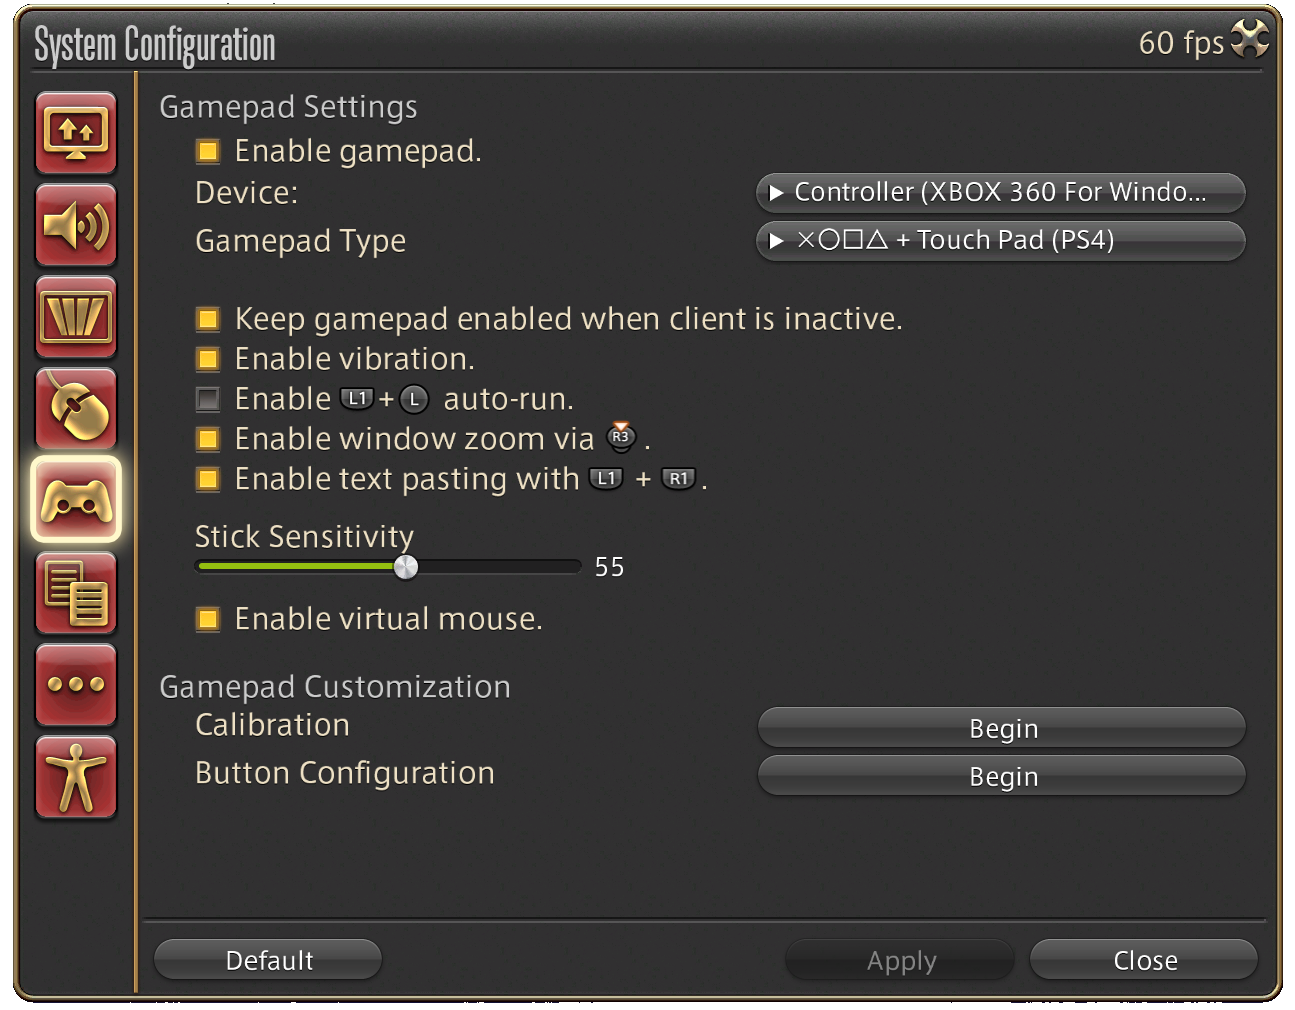 System Configuration - Controller Settings